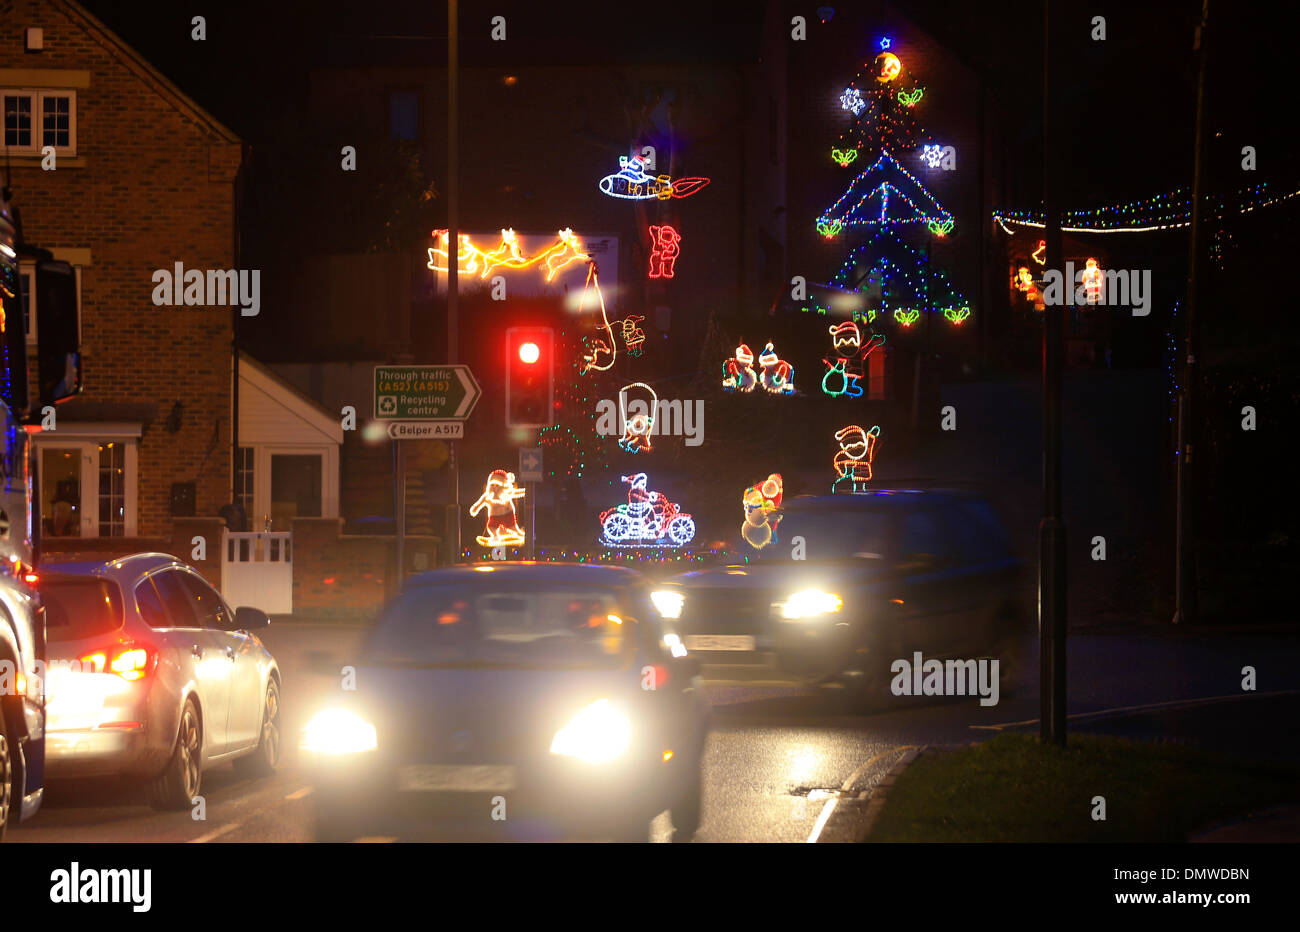 Ashbourne, Derbyshire, UK. 16th December 2013. Driving home for Christmas, sitting on his motorbike, Santa helps to brighten what could be Britain's most festive junction. A number of homes above the traffic lights at the junction of Park Road and Belper Road in Ashbourne, Derbyshire have been decorated with Christmas lights that dwarf the traffic signals below. Credit:  Joanne Roberts/Alamy Live News Stock Photo